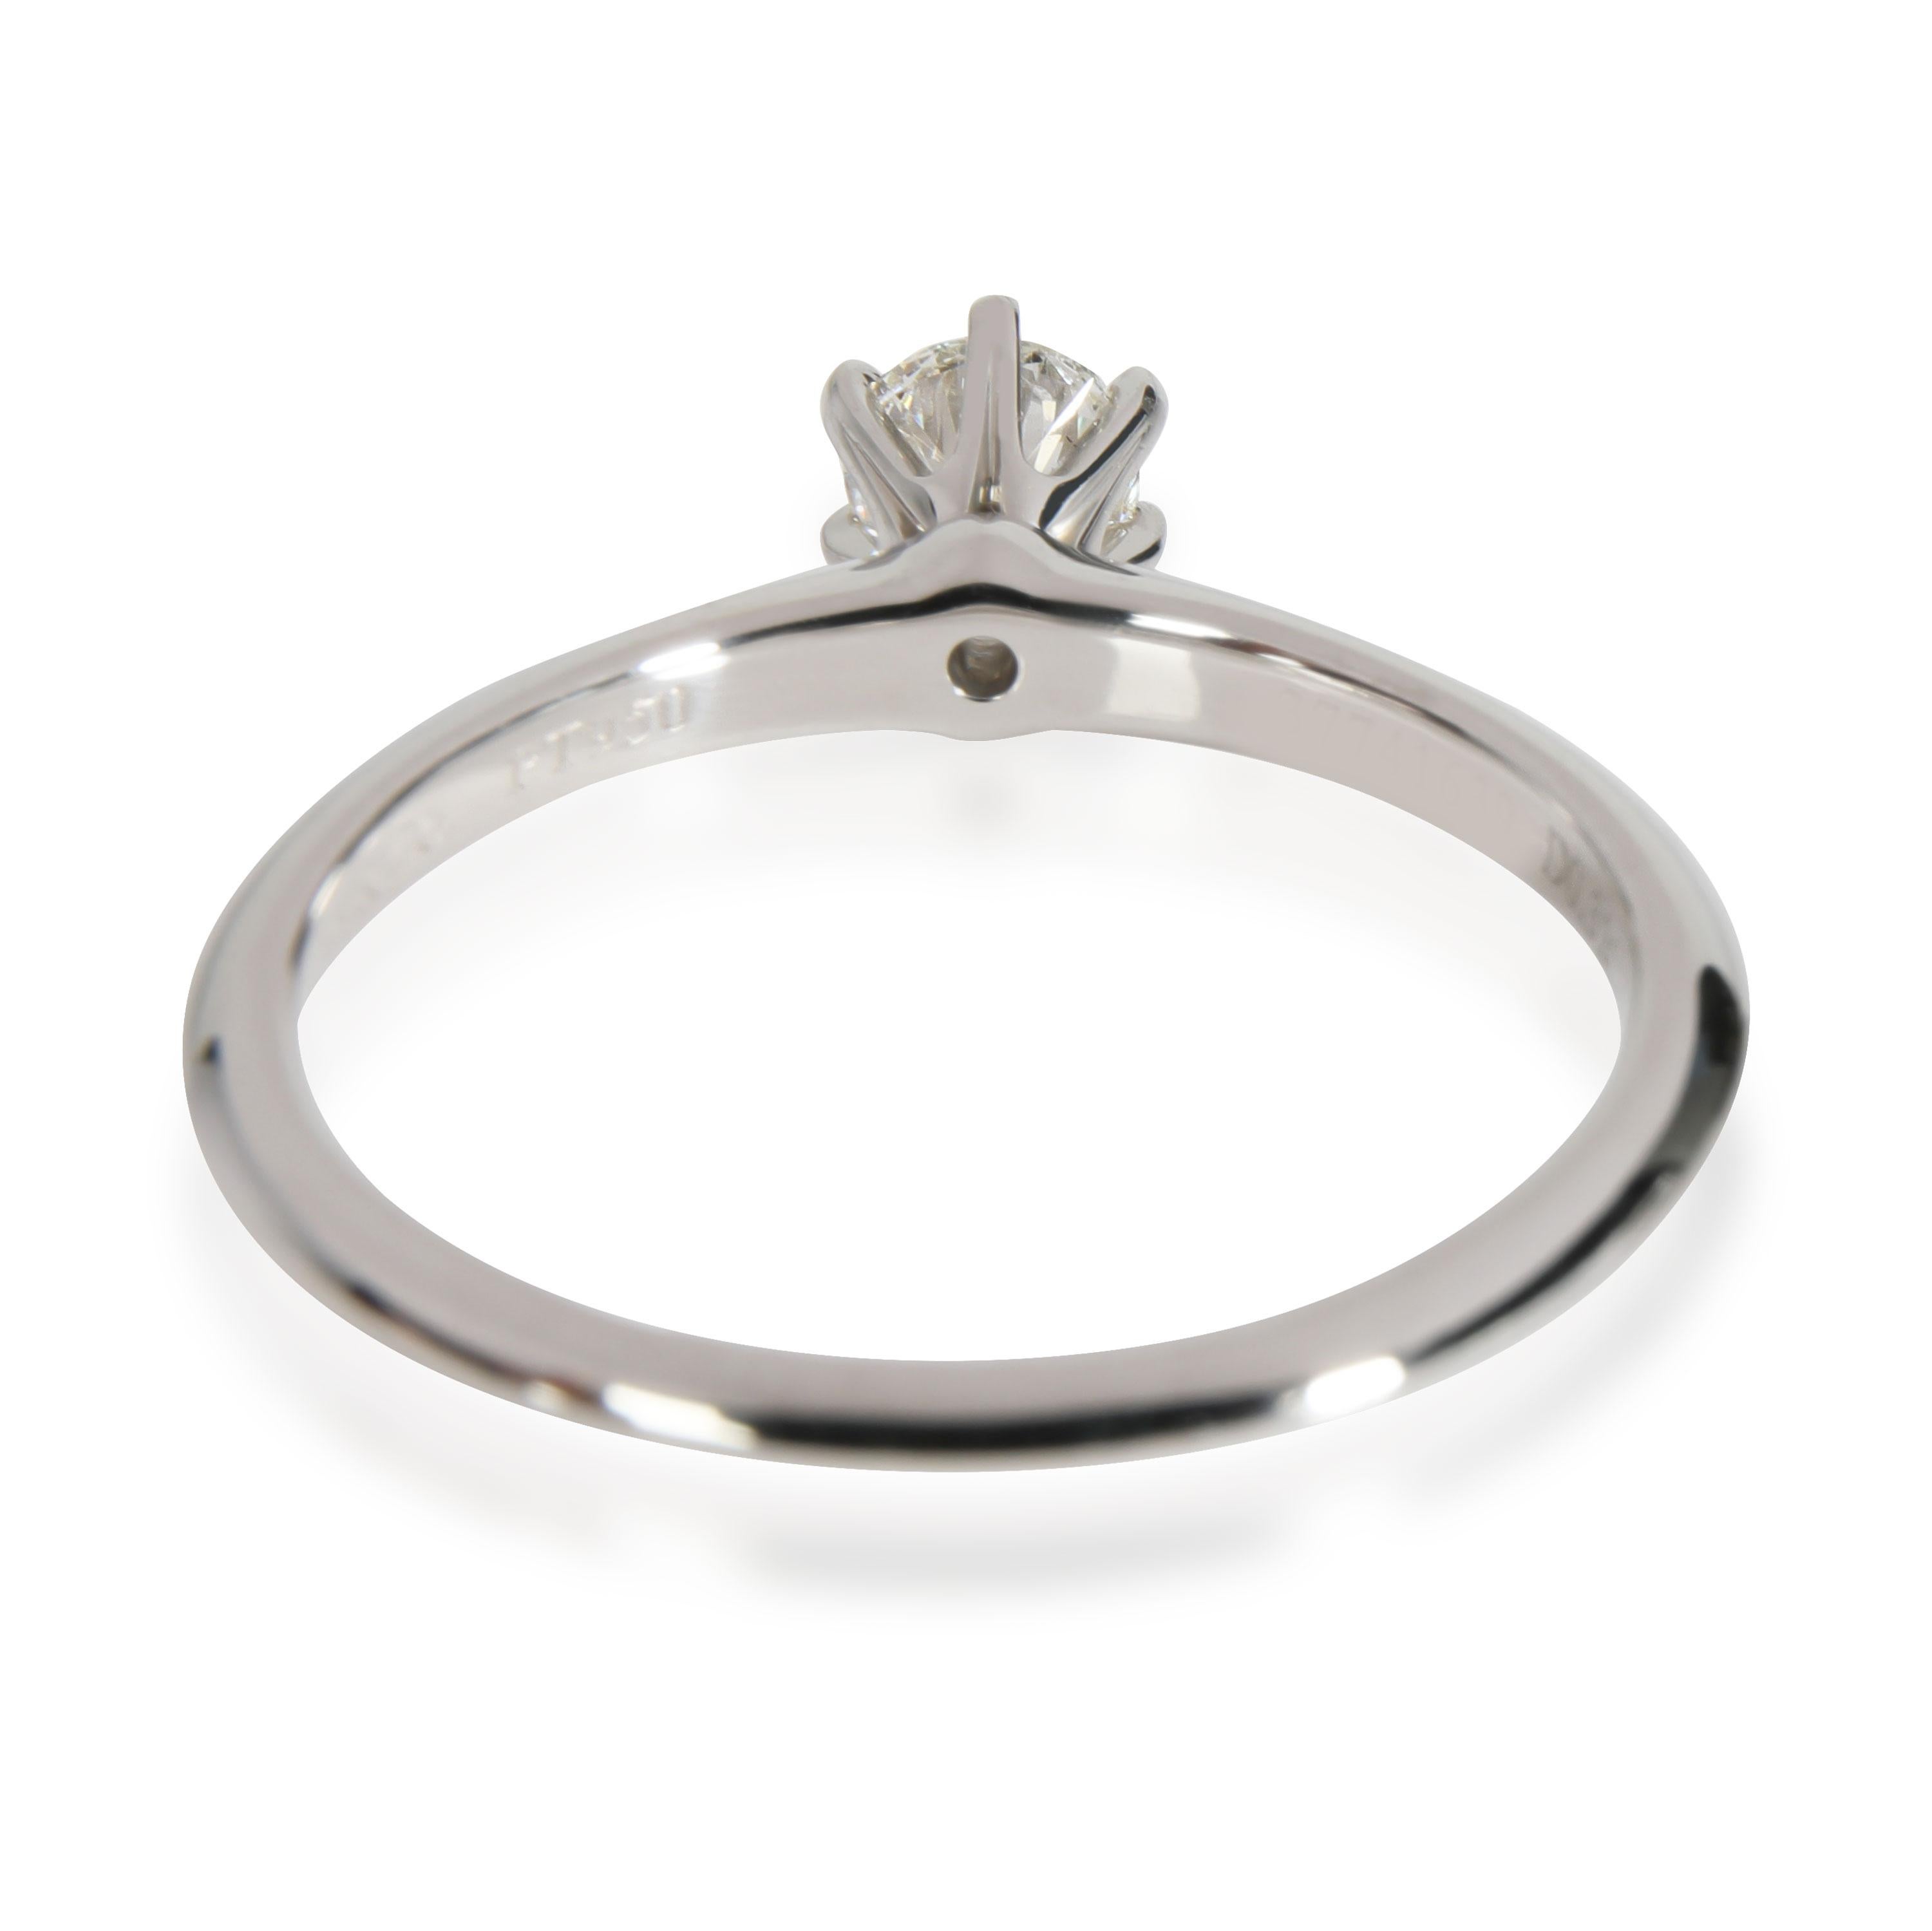 
Tiffany & Co. Diamond Engagement Ring in Platinum Platinum H VS1 0.32 CTW

PRIMARY DETAILS
SKU: 112096
Listing Title: Tiffany & Co. Diamond Engagement Ring in Platinum Platinum H VS1 0.32 CTW
Condition Description: Retails for 2730 USD. In